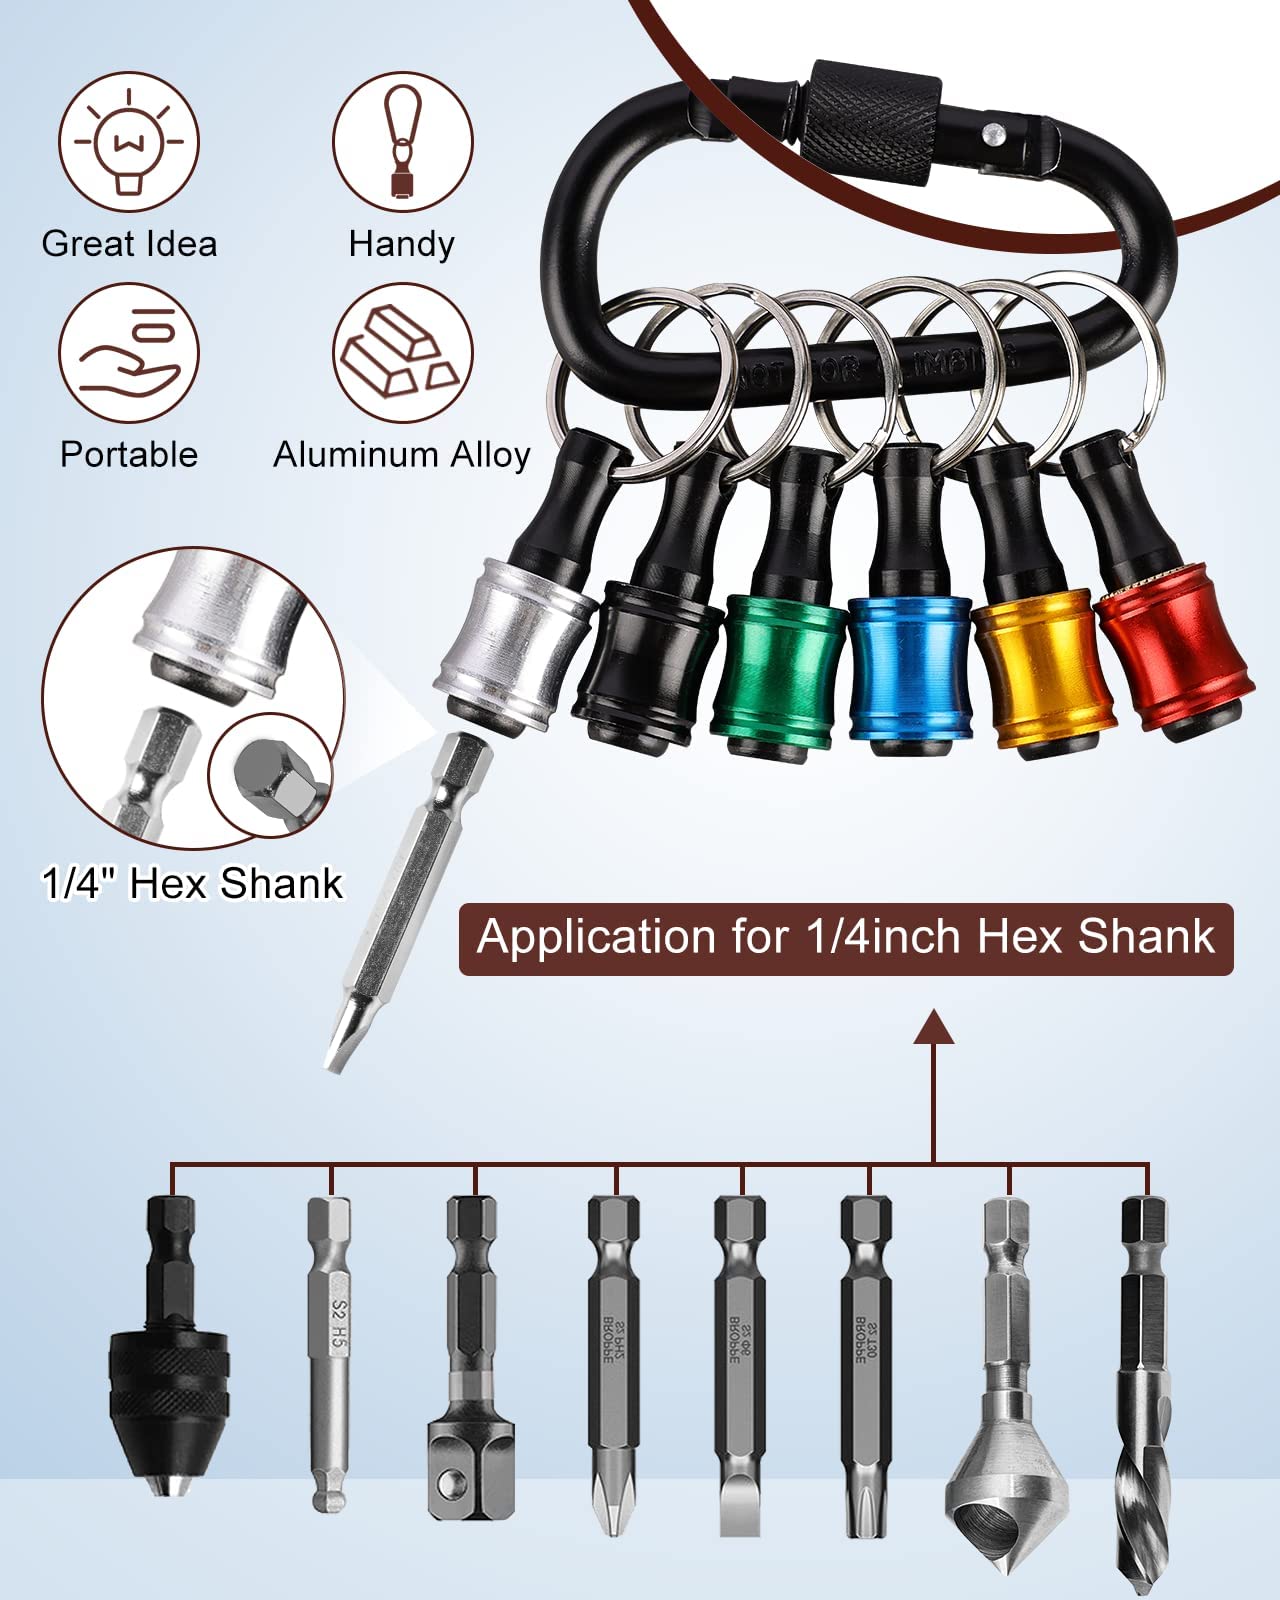 12pc Portable Bit holder Keychain, 1/4in Hex Shank Screwdriver Bit Clip for Impact Driver Flexible Drill Bit Extension Nut Driver W/Black Carabiner, Quick Release Lightweight Drill Screw Adapter